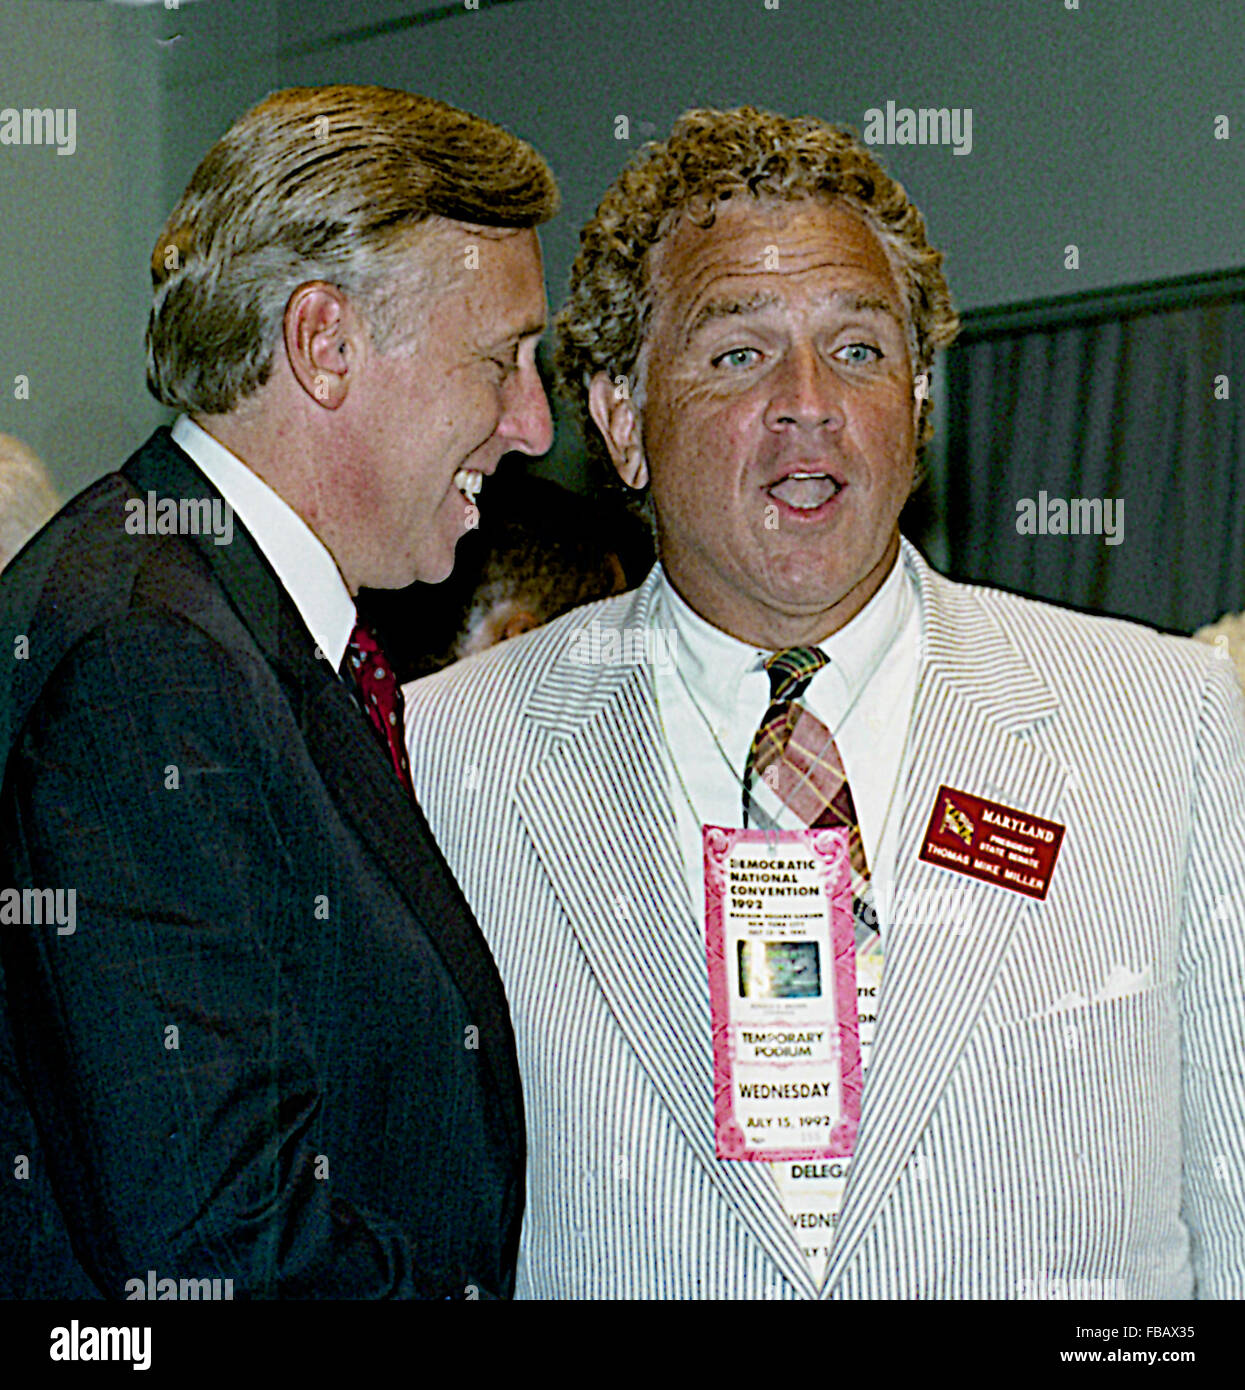 New York, NY., USA, 15th July, 1992 Congressman Steny Hoyer (D-MD) and Maryland State Senator Thomas 'Mike' Miller share a moment backstage at the Democratic National Convention in Madison Square Garden. Steny Hamilton Hoyer is the U.S. Representative for Maryland's 5th congressional district, serving since 1981. The district includes a large swath of rural and suburban territory southeast of Washington, D.C.. Thomas V. 'Mike' Miller, Jr. is the current president of the Maryland Senate Credit: Mark Reinstein Stock Photo